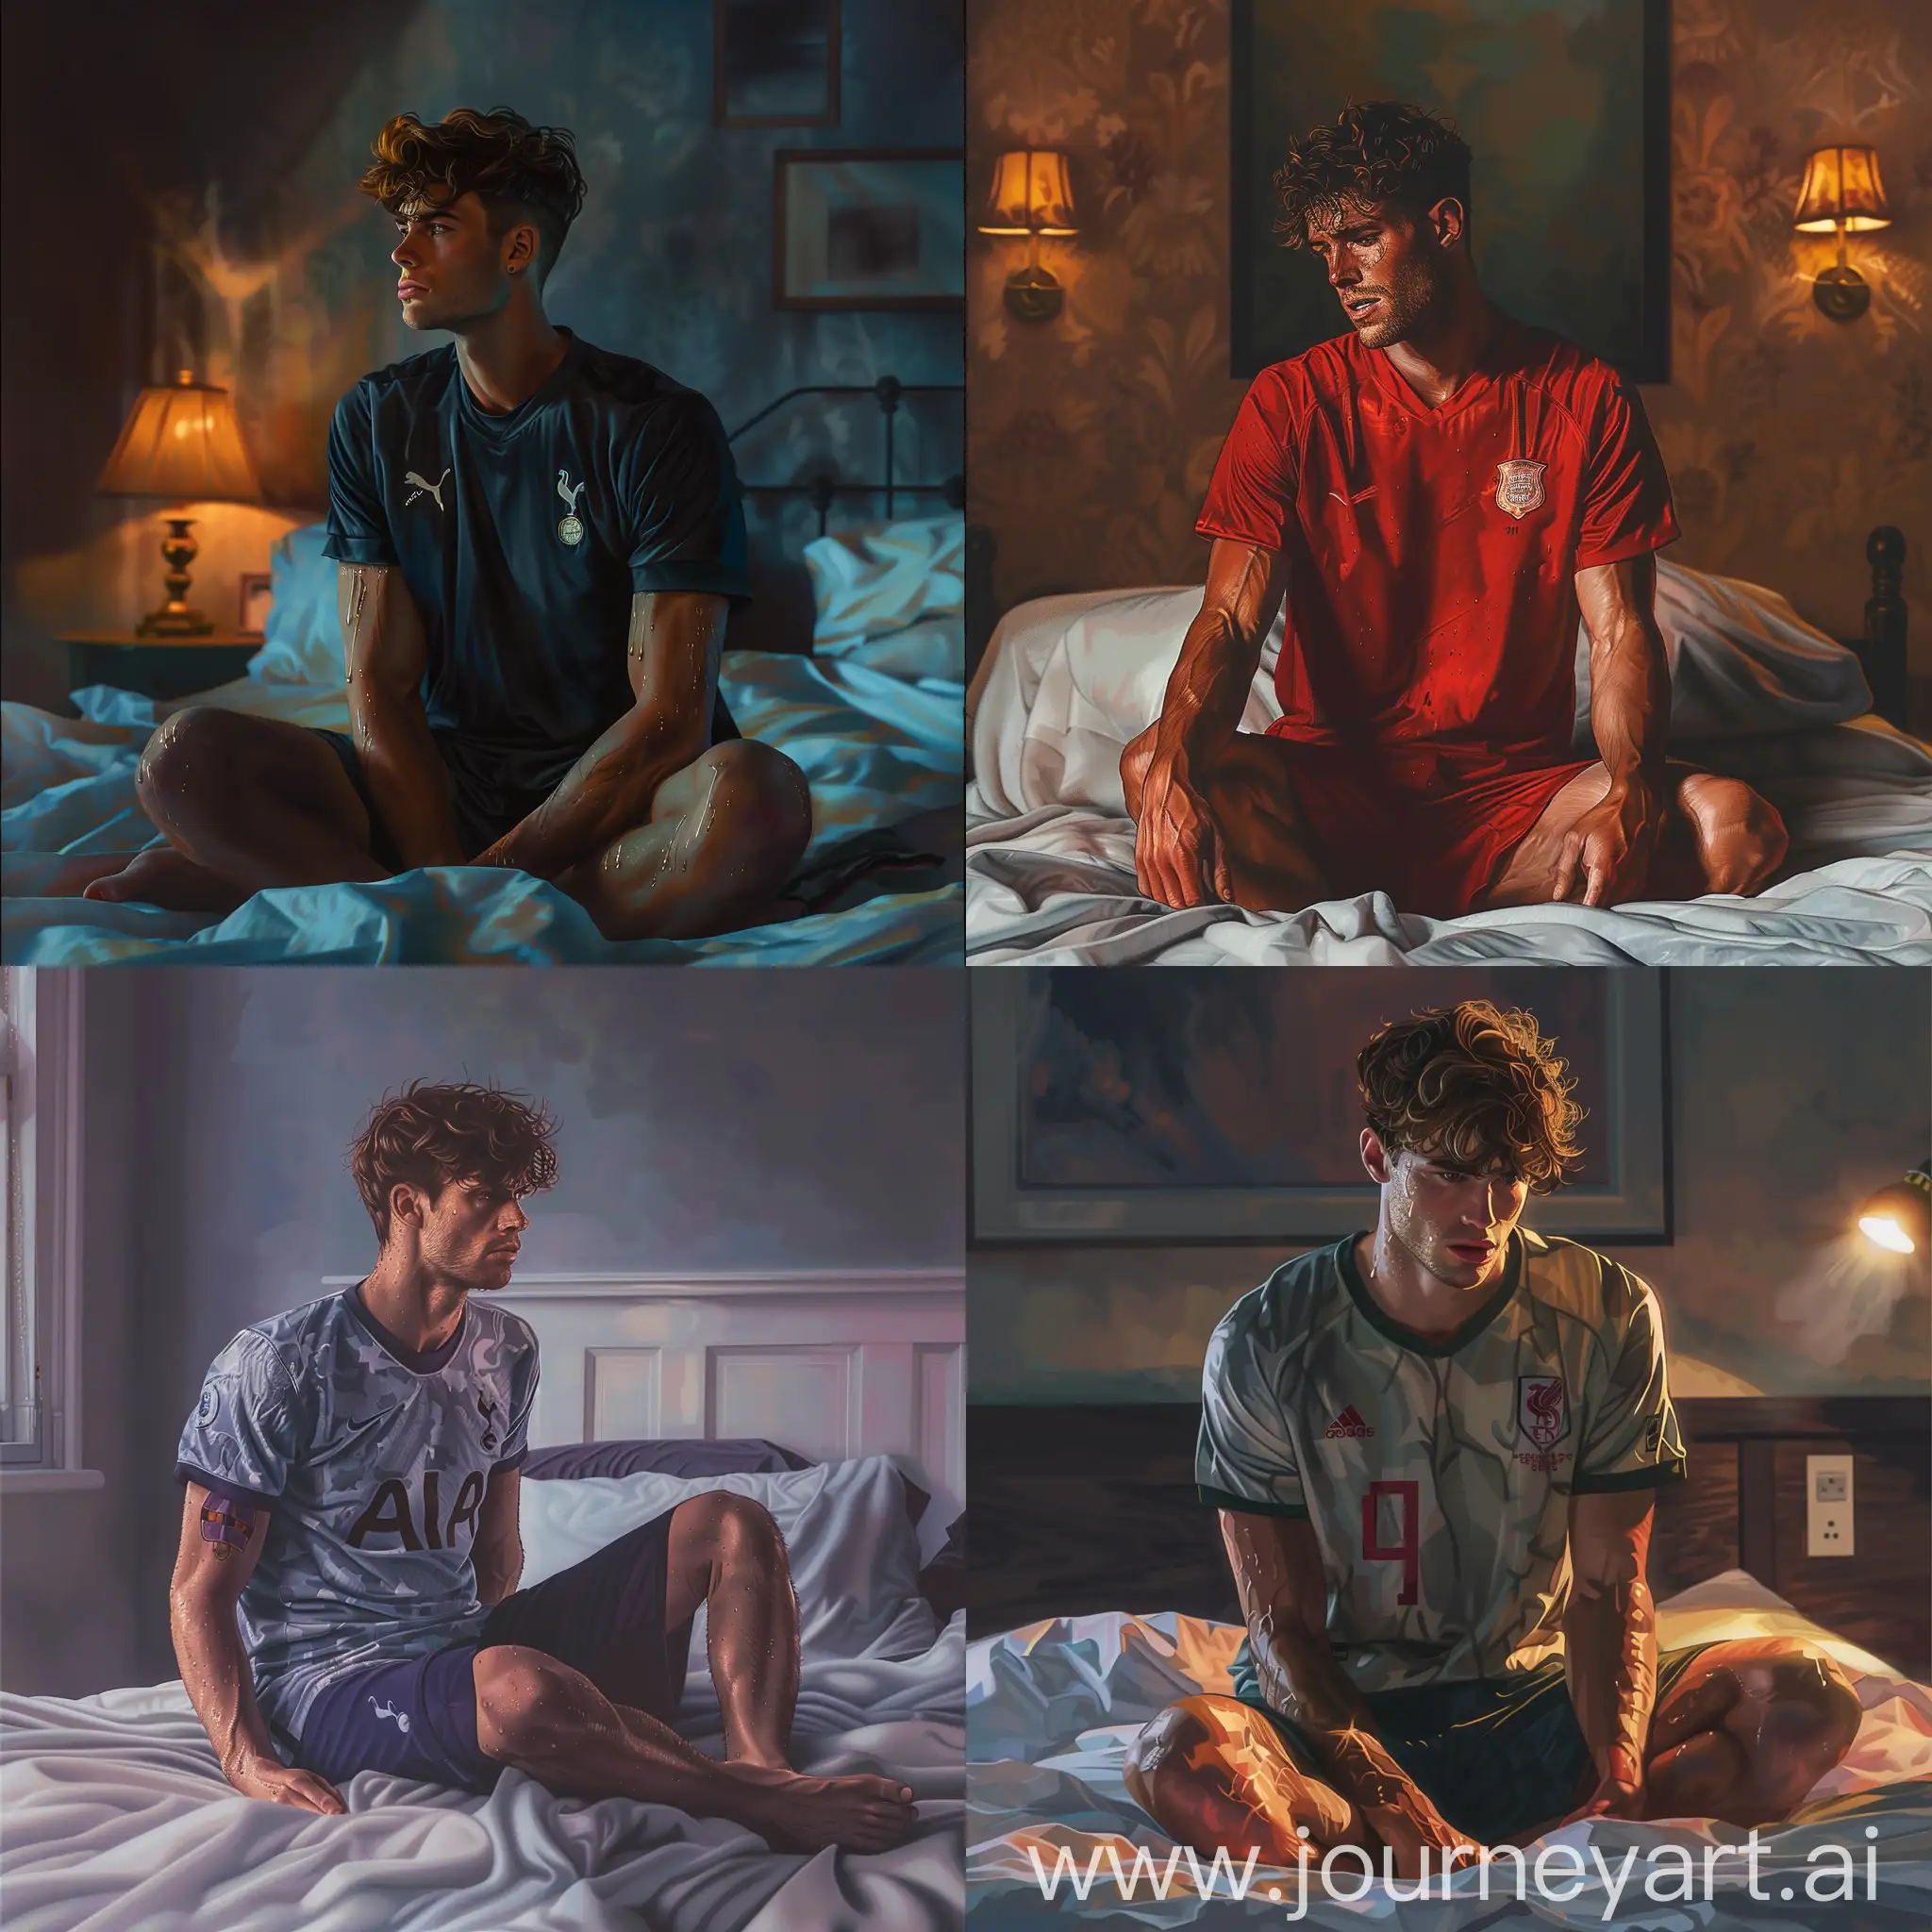 Handsome young attractive footballer, ideal athletic physique, tall, wearing football jersey t shirt and shorts, sweaty, hyper realistic, photorealistic, candid, siting on bed relaxing, indoors, during night, cozy, muscular, attractive chiseled jawline, short wavy hair, ideal physique